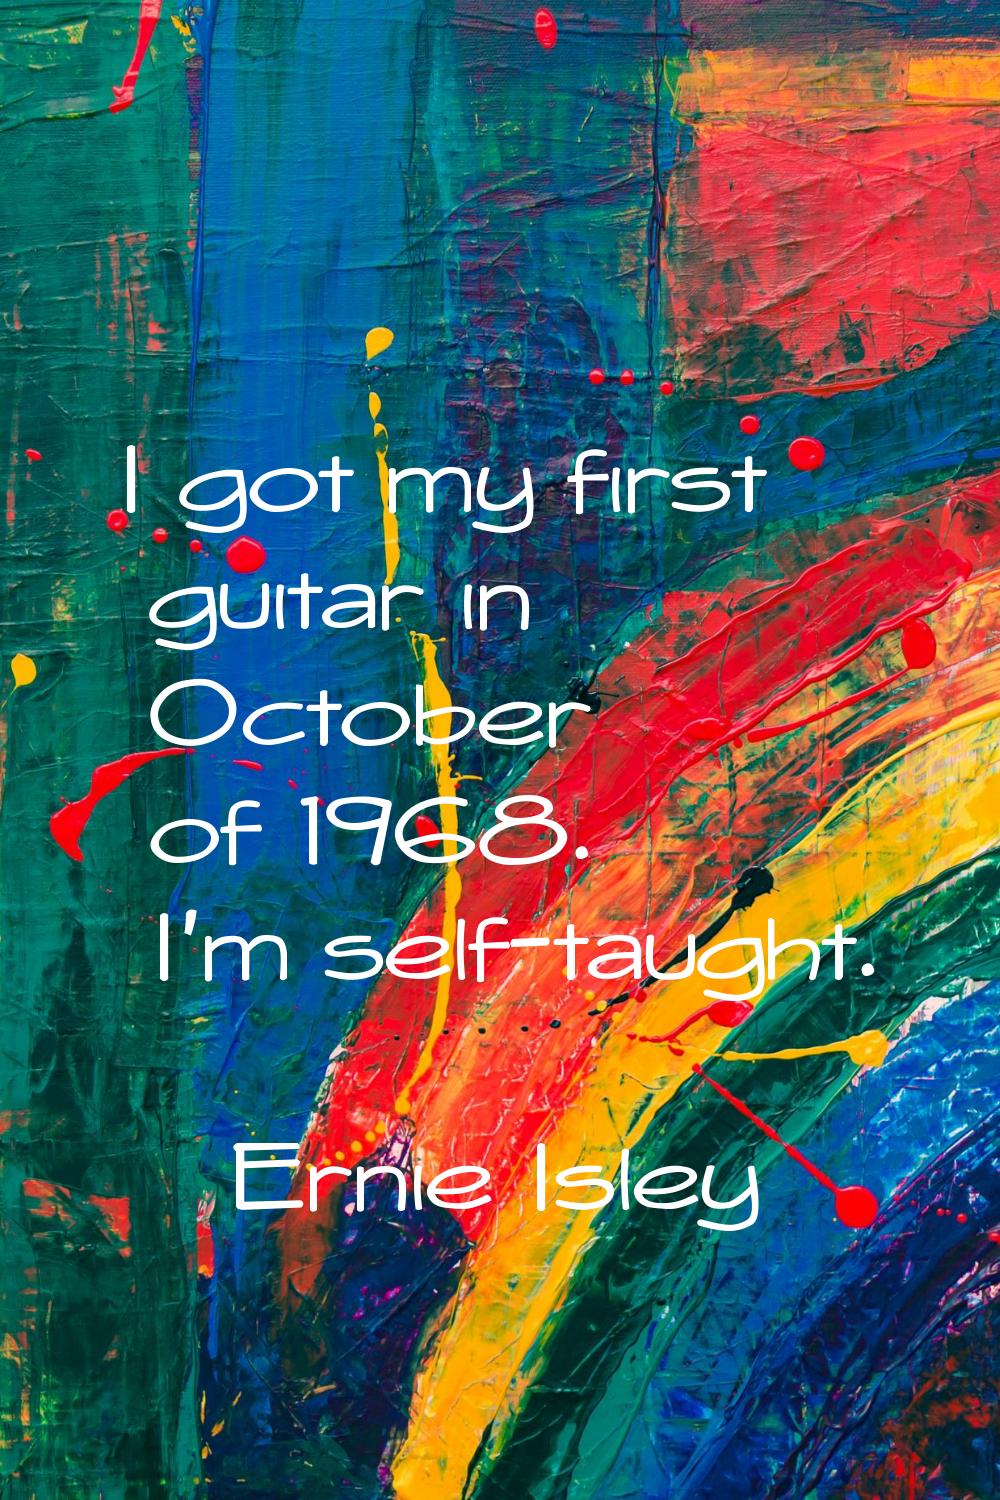 I got my first guitar in October of 1968. I'm self-taught.